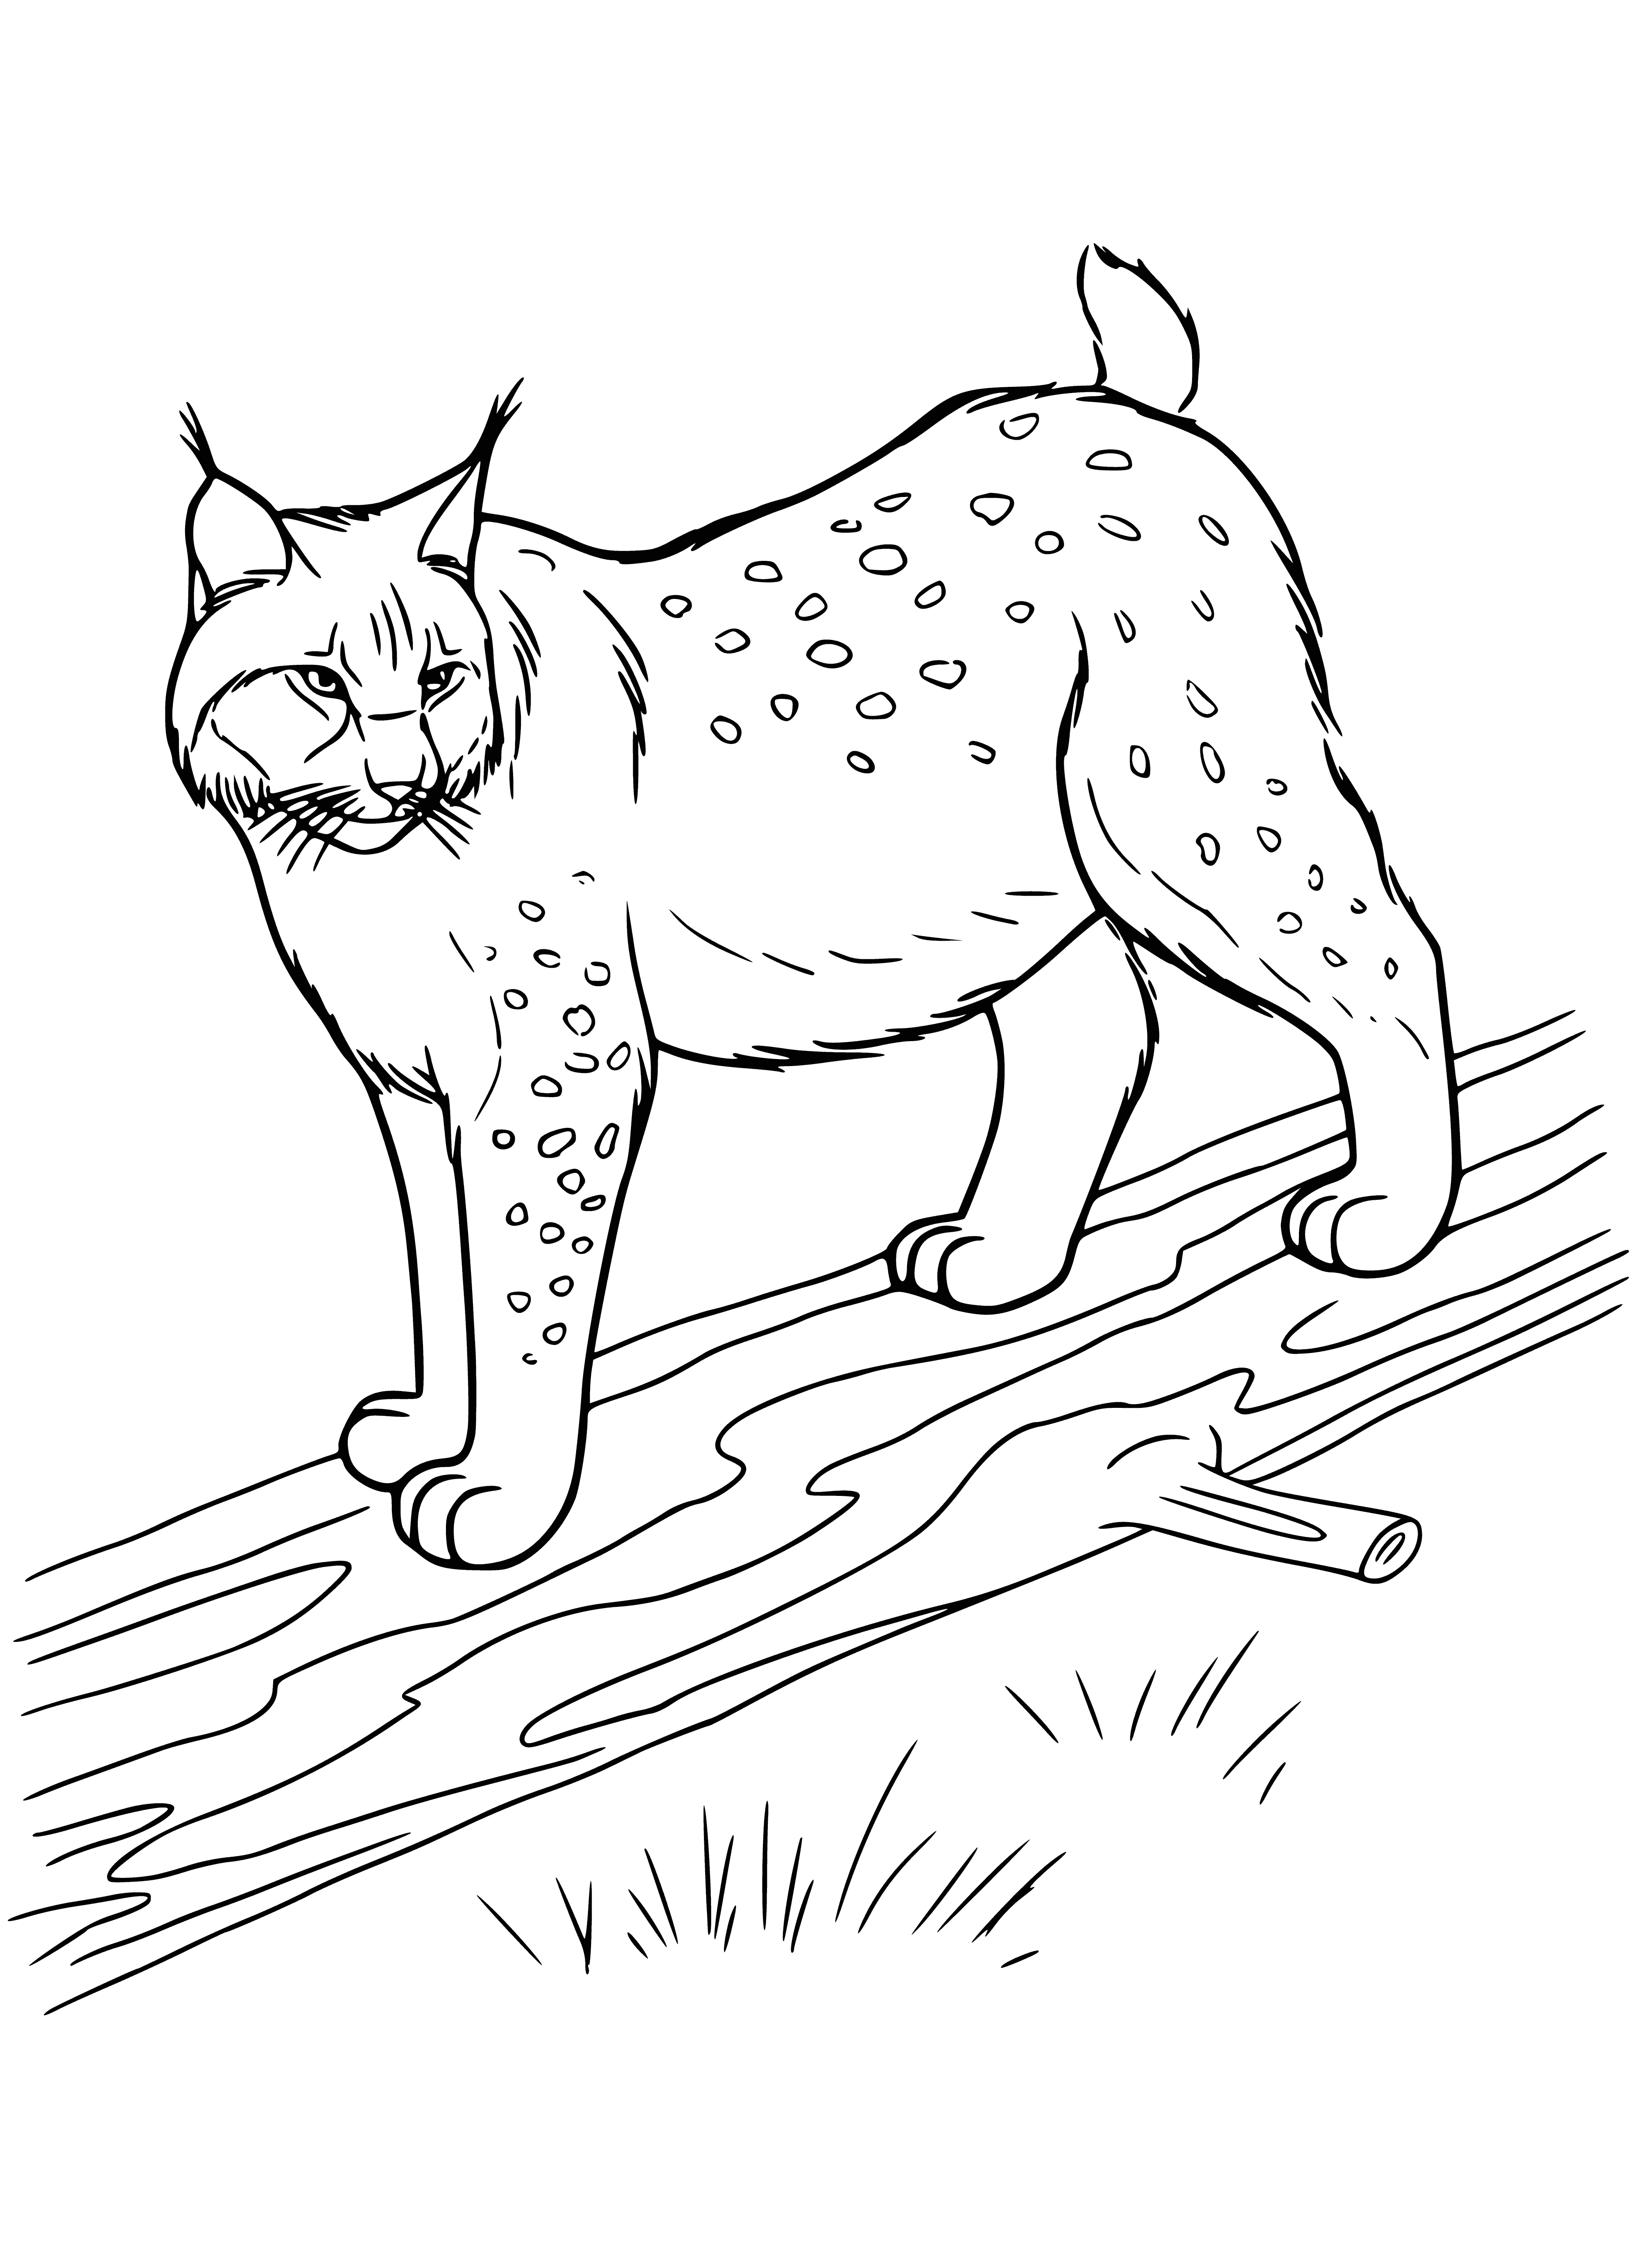 coloring page: Gray-spotted animal with long ears and fur-covered body perched on a tree branch. Big furry paws and short tail.